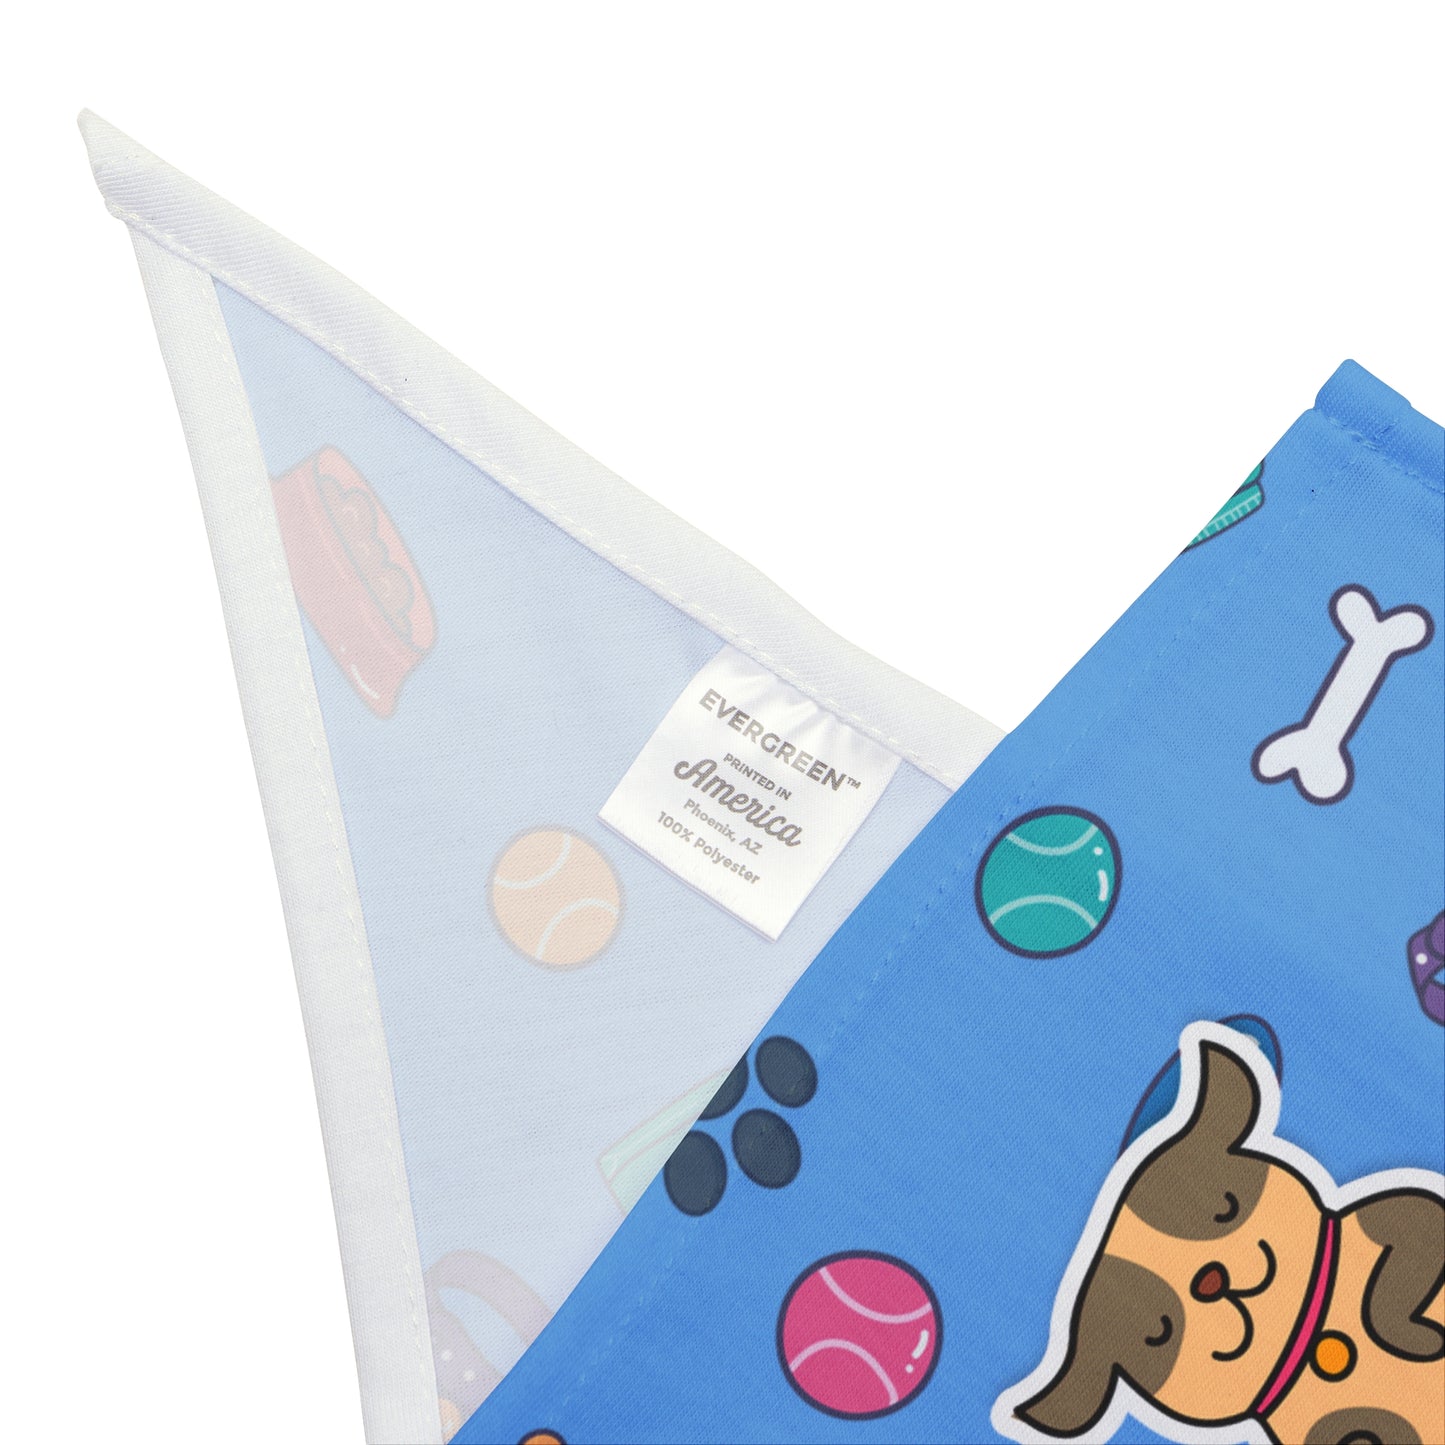 back of a pet bandana with a beautiful pattern design featuring all things dog love. A smiling dog sleeping below a message that says "Life's hard". Bandana's Color is blue